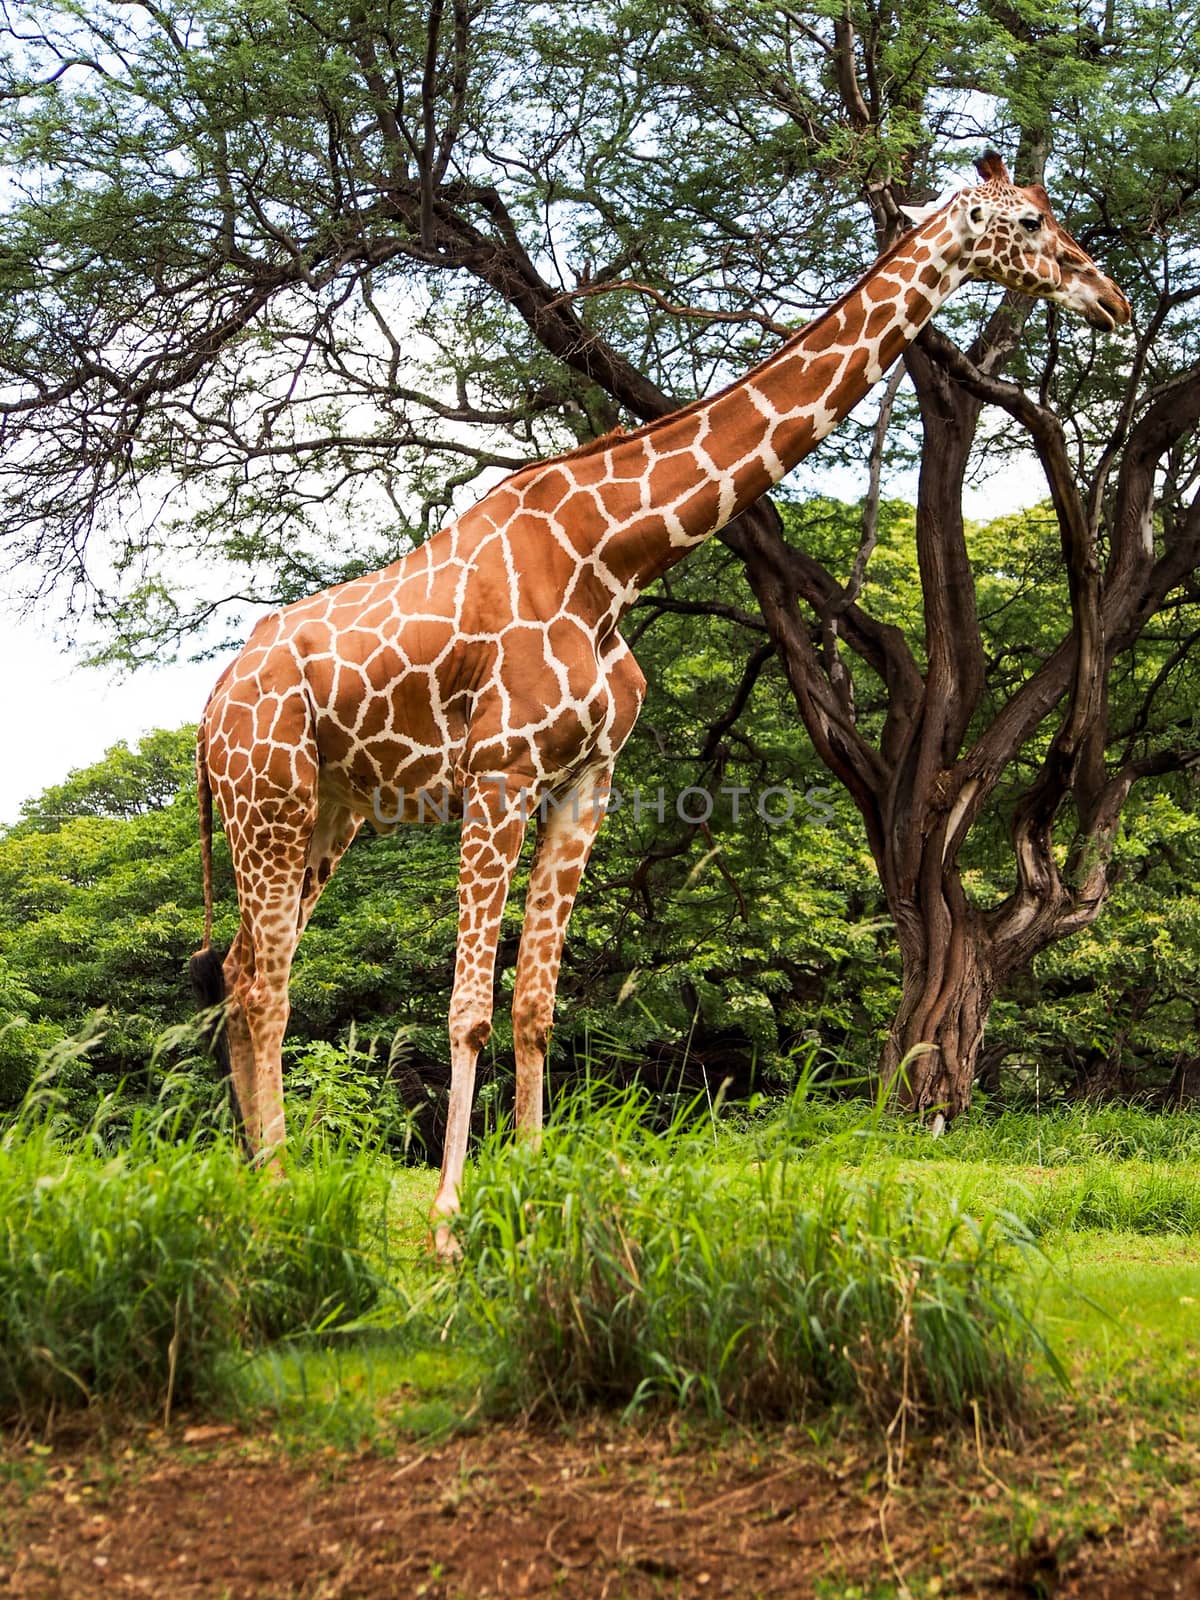 A giraffe reaches the top of the trees to eat leaves. 